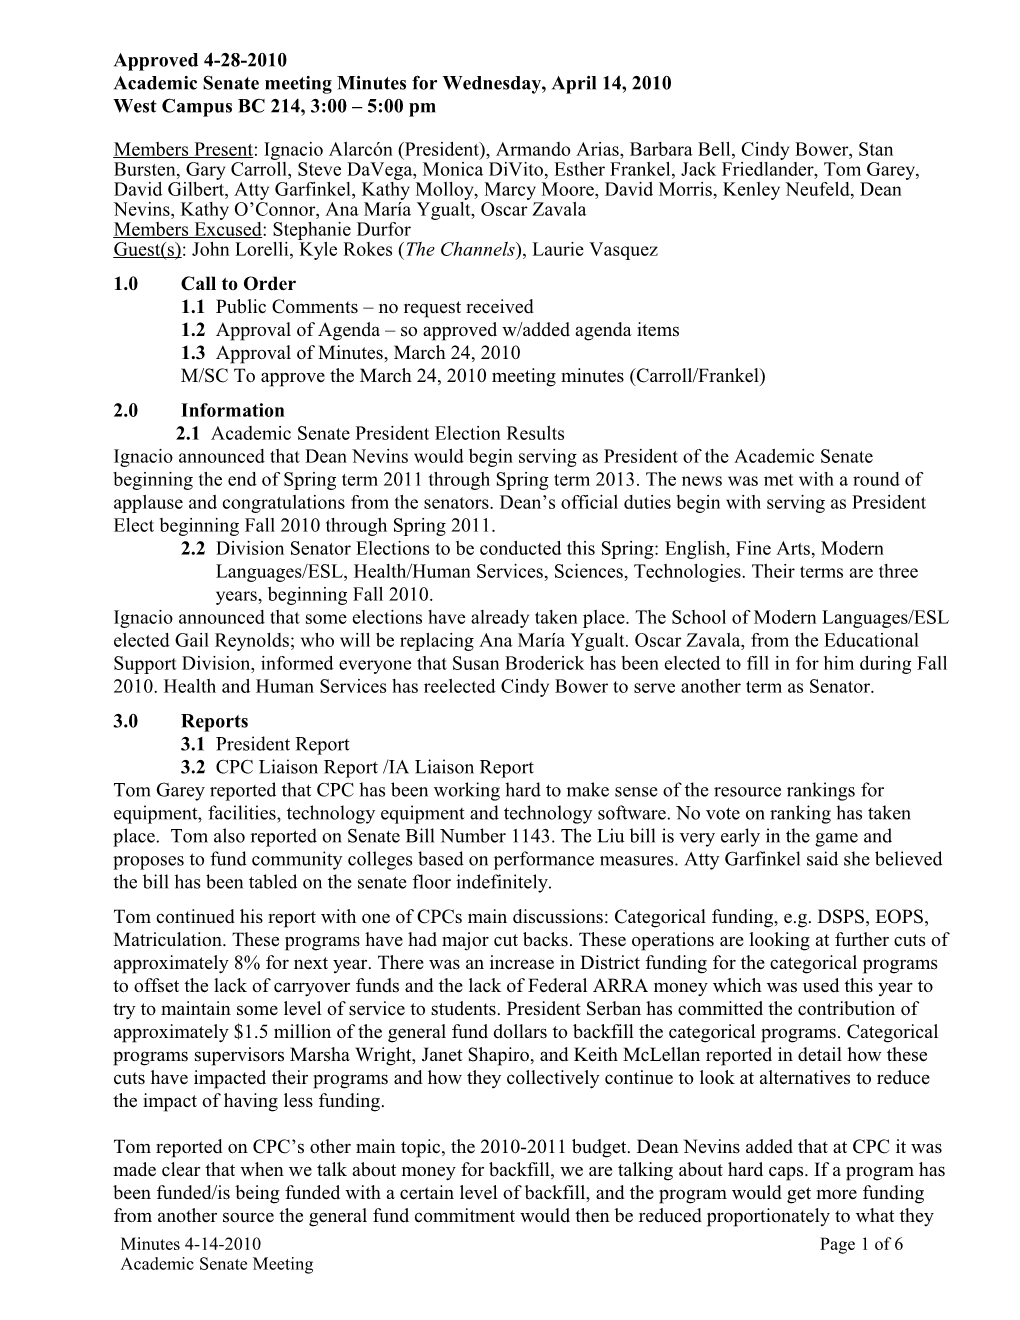 Academic Senate Meeting Minutes for Wednesday, April 14, 2010